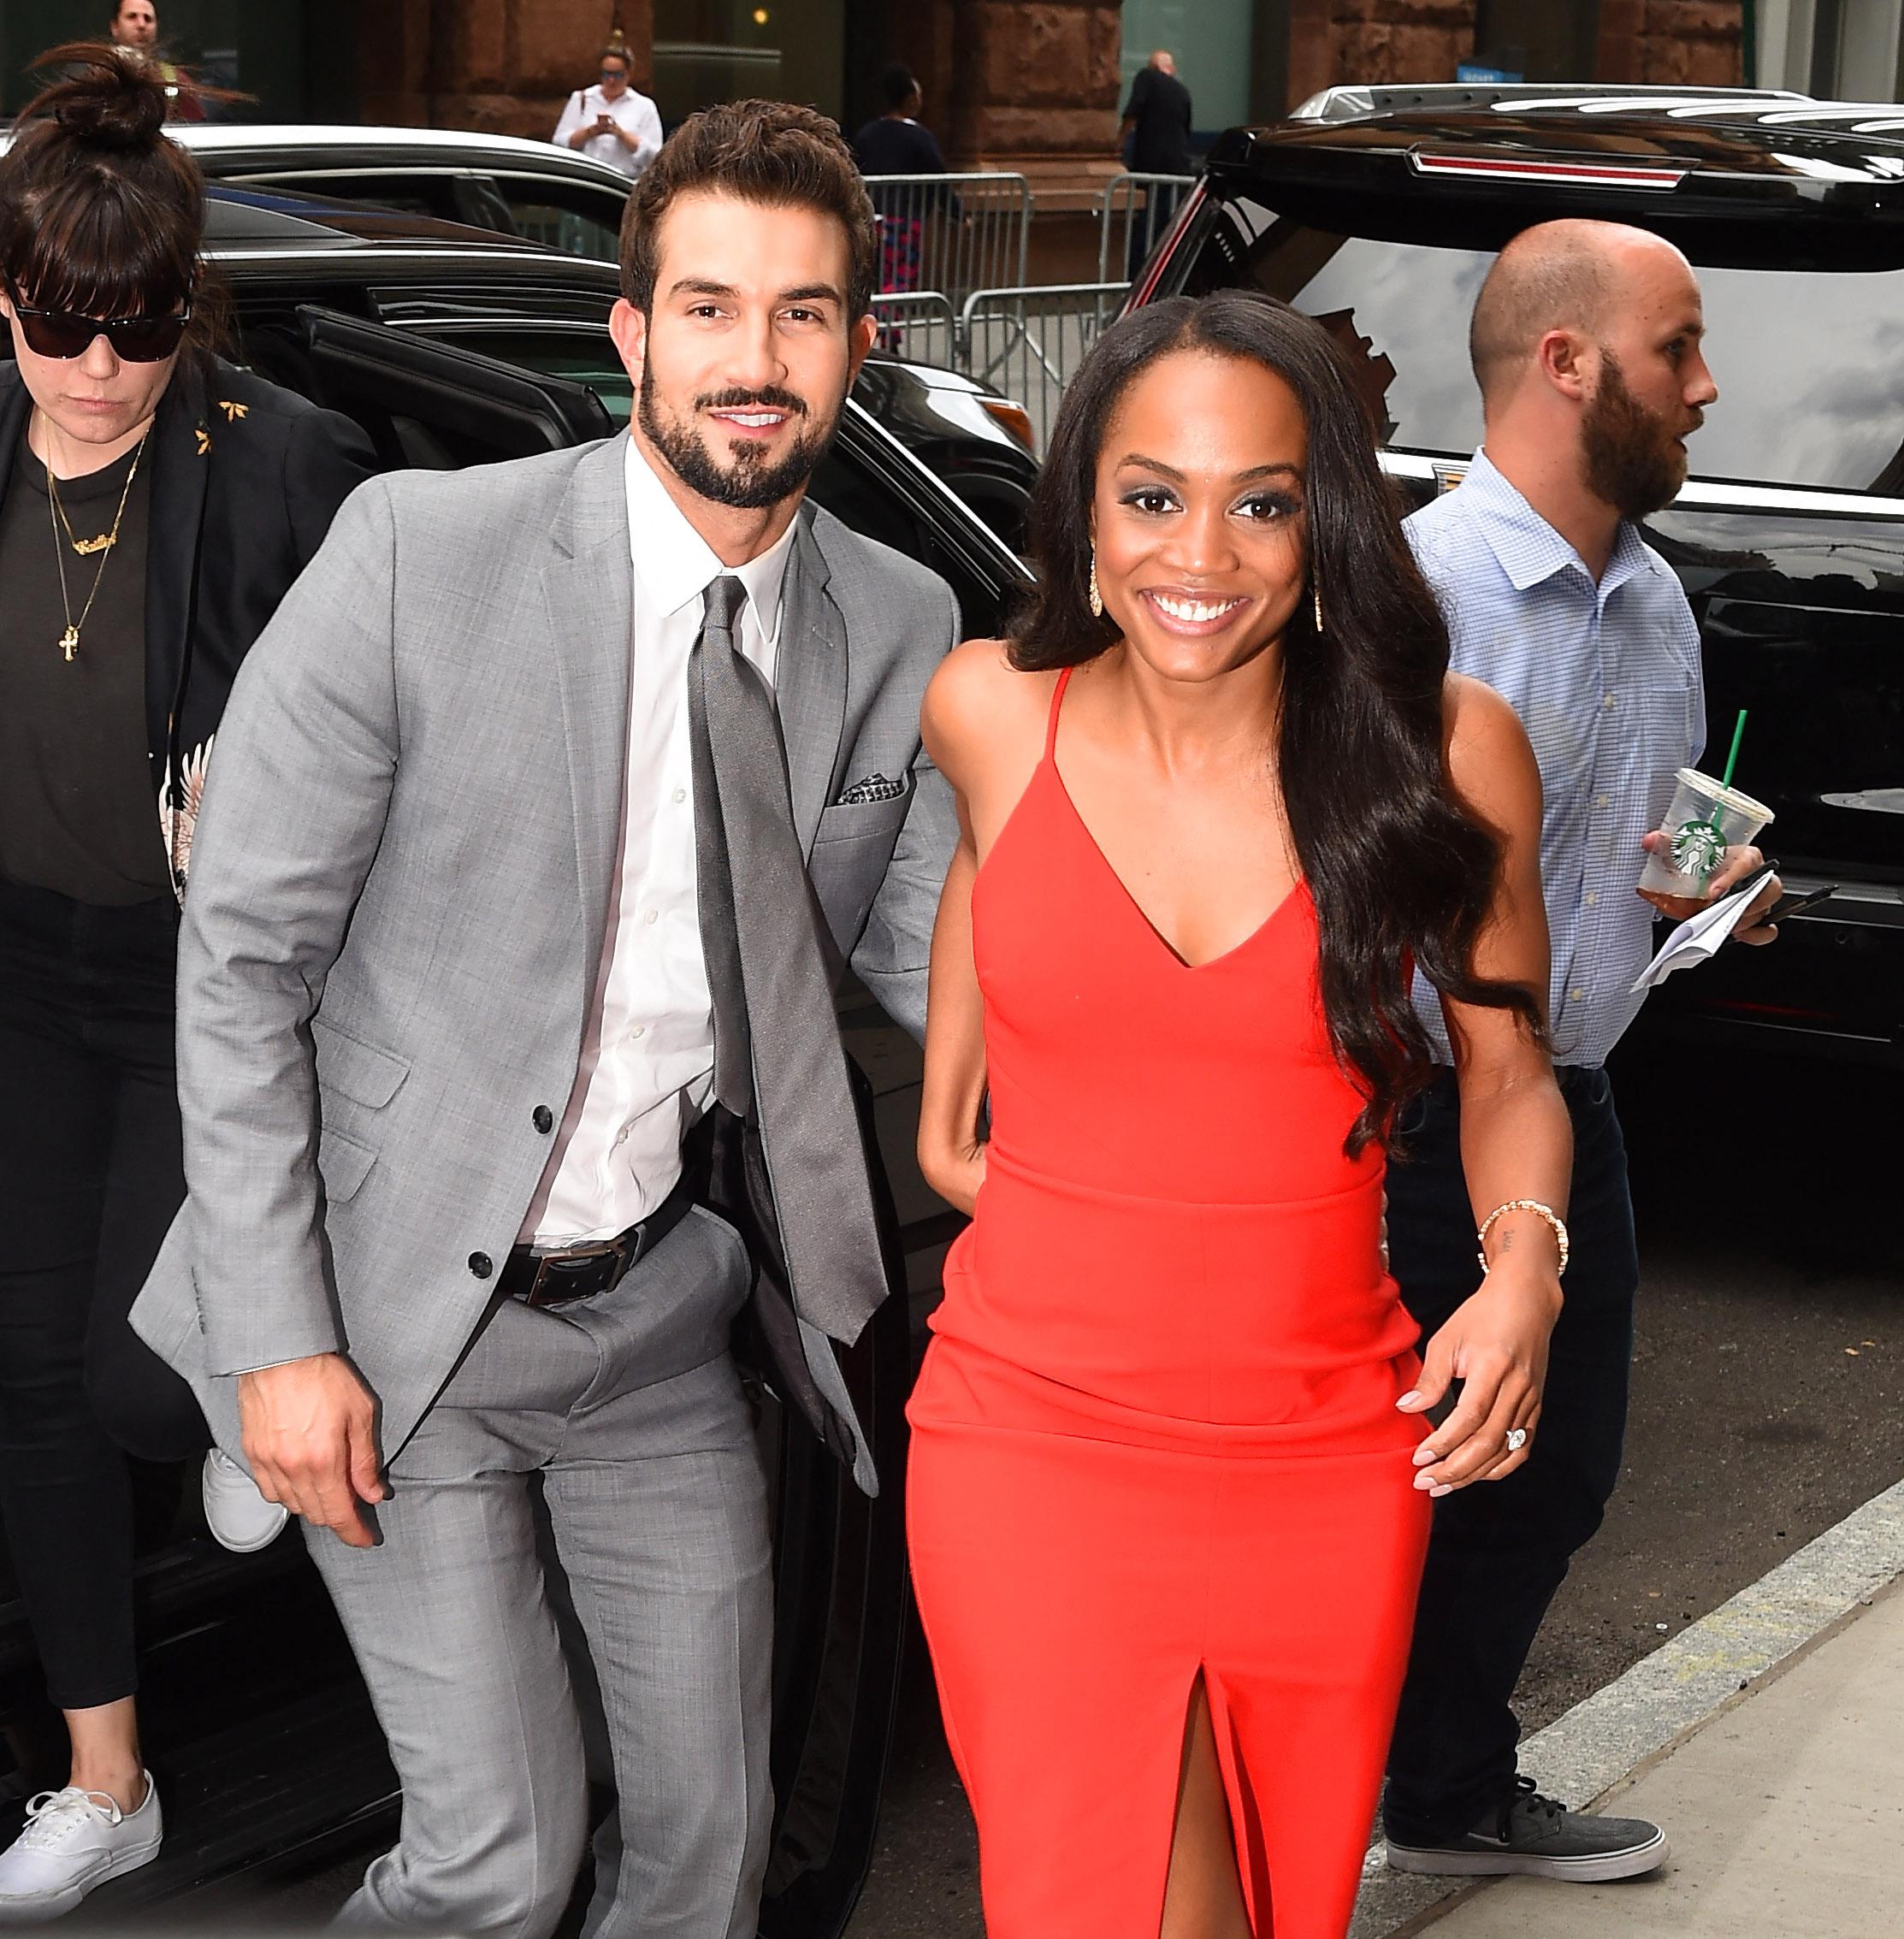 Rachel Lindsay and Bryan Abasolo at the aol build kiss and show off her engagement ring